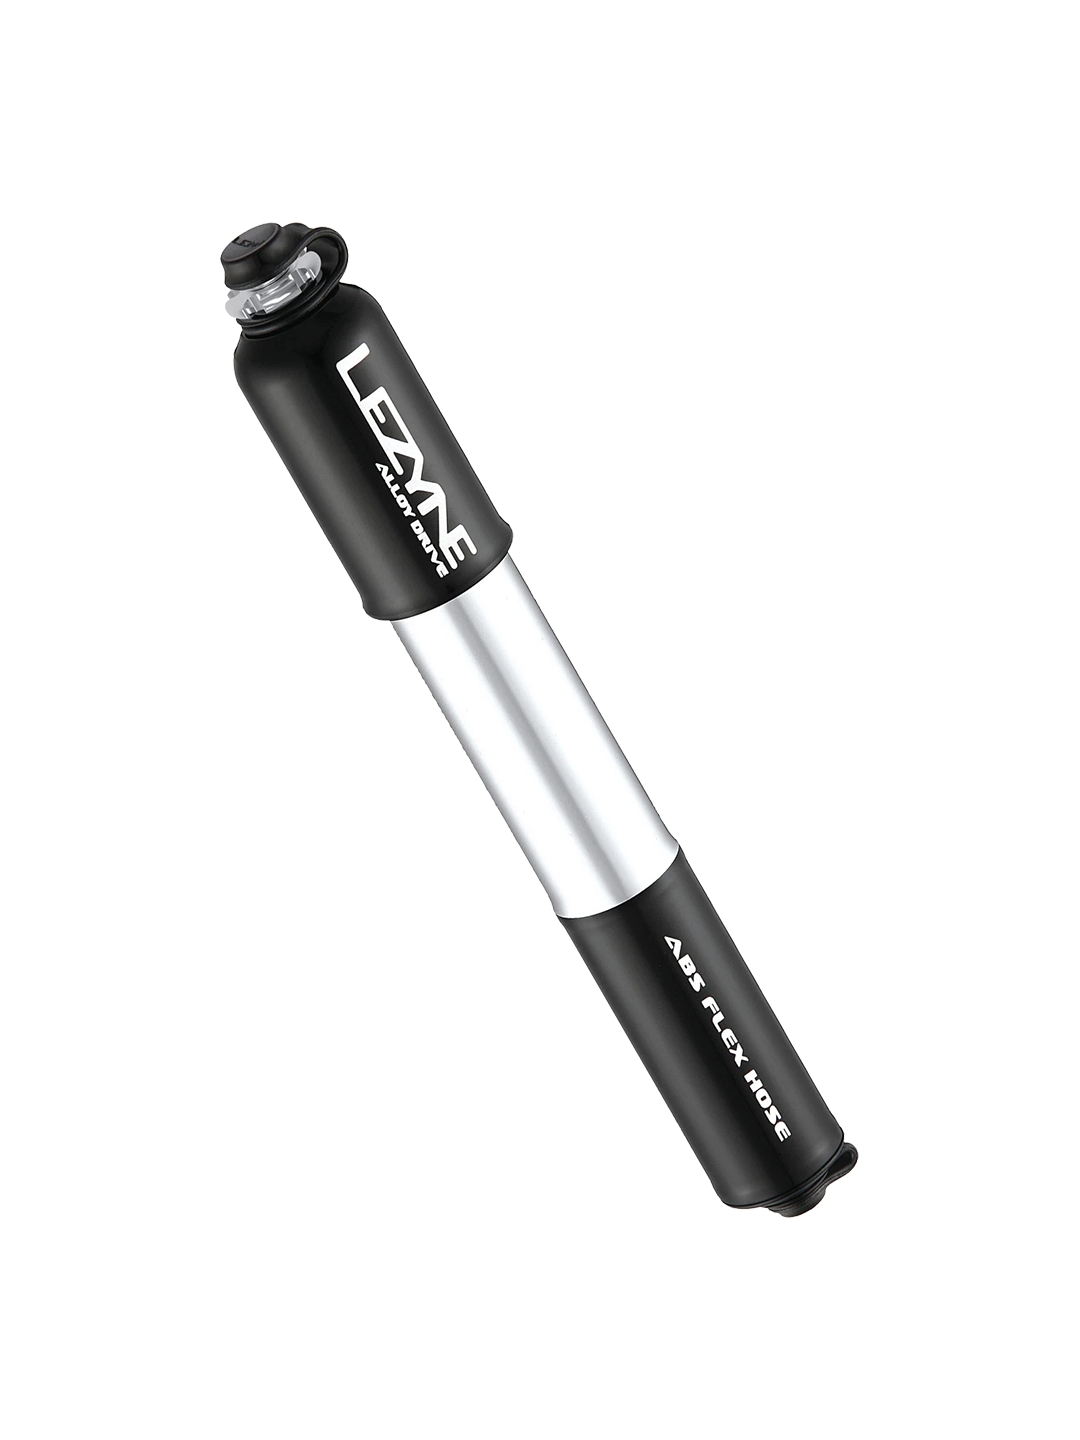 bontrager air support hp pro s road pump